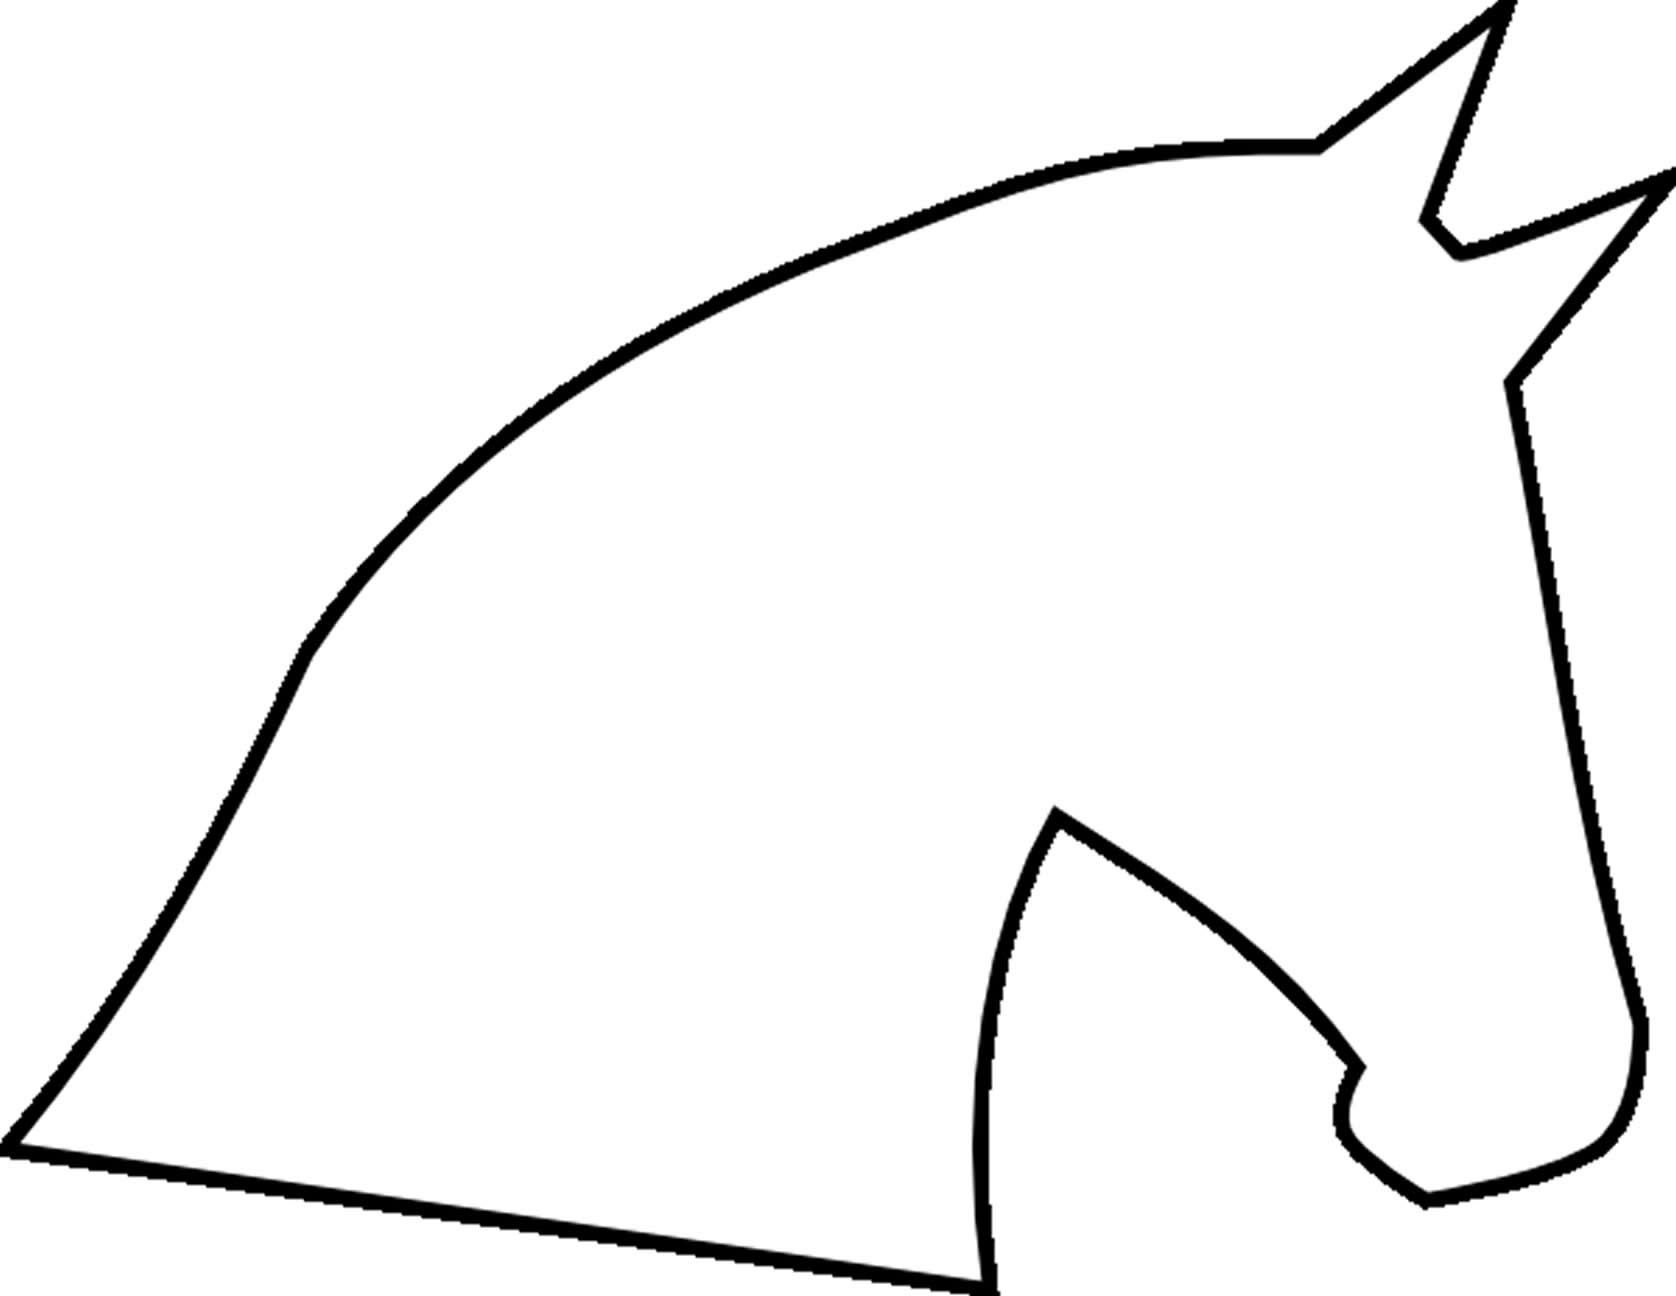 clipart horse template